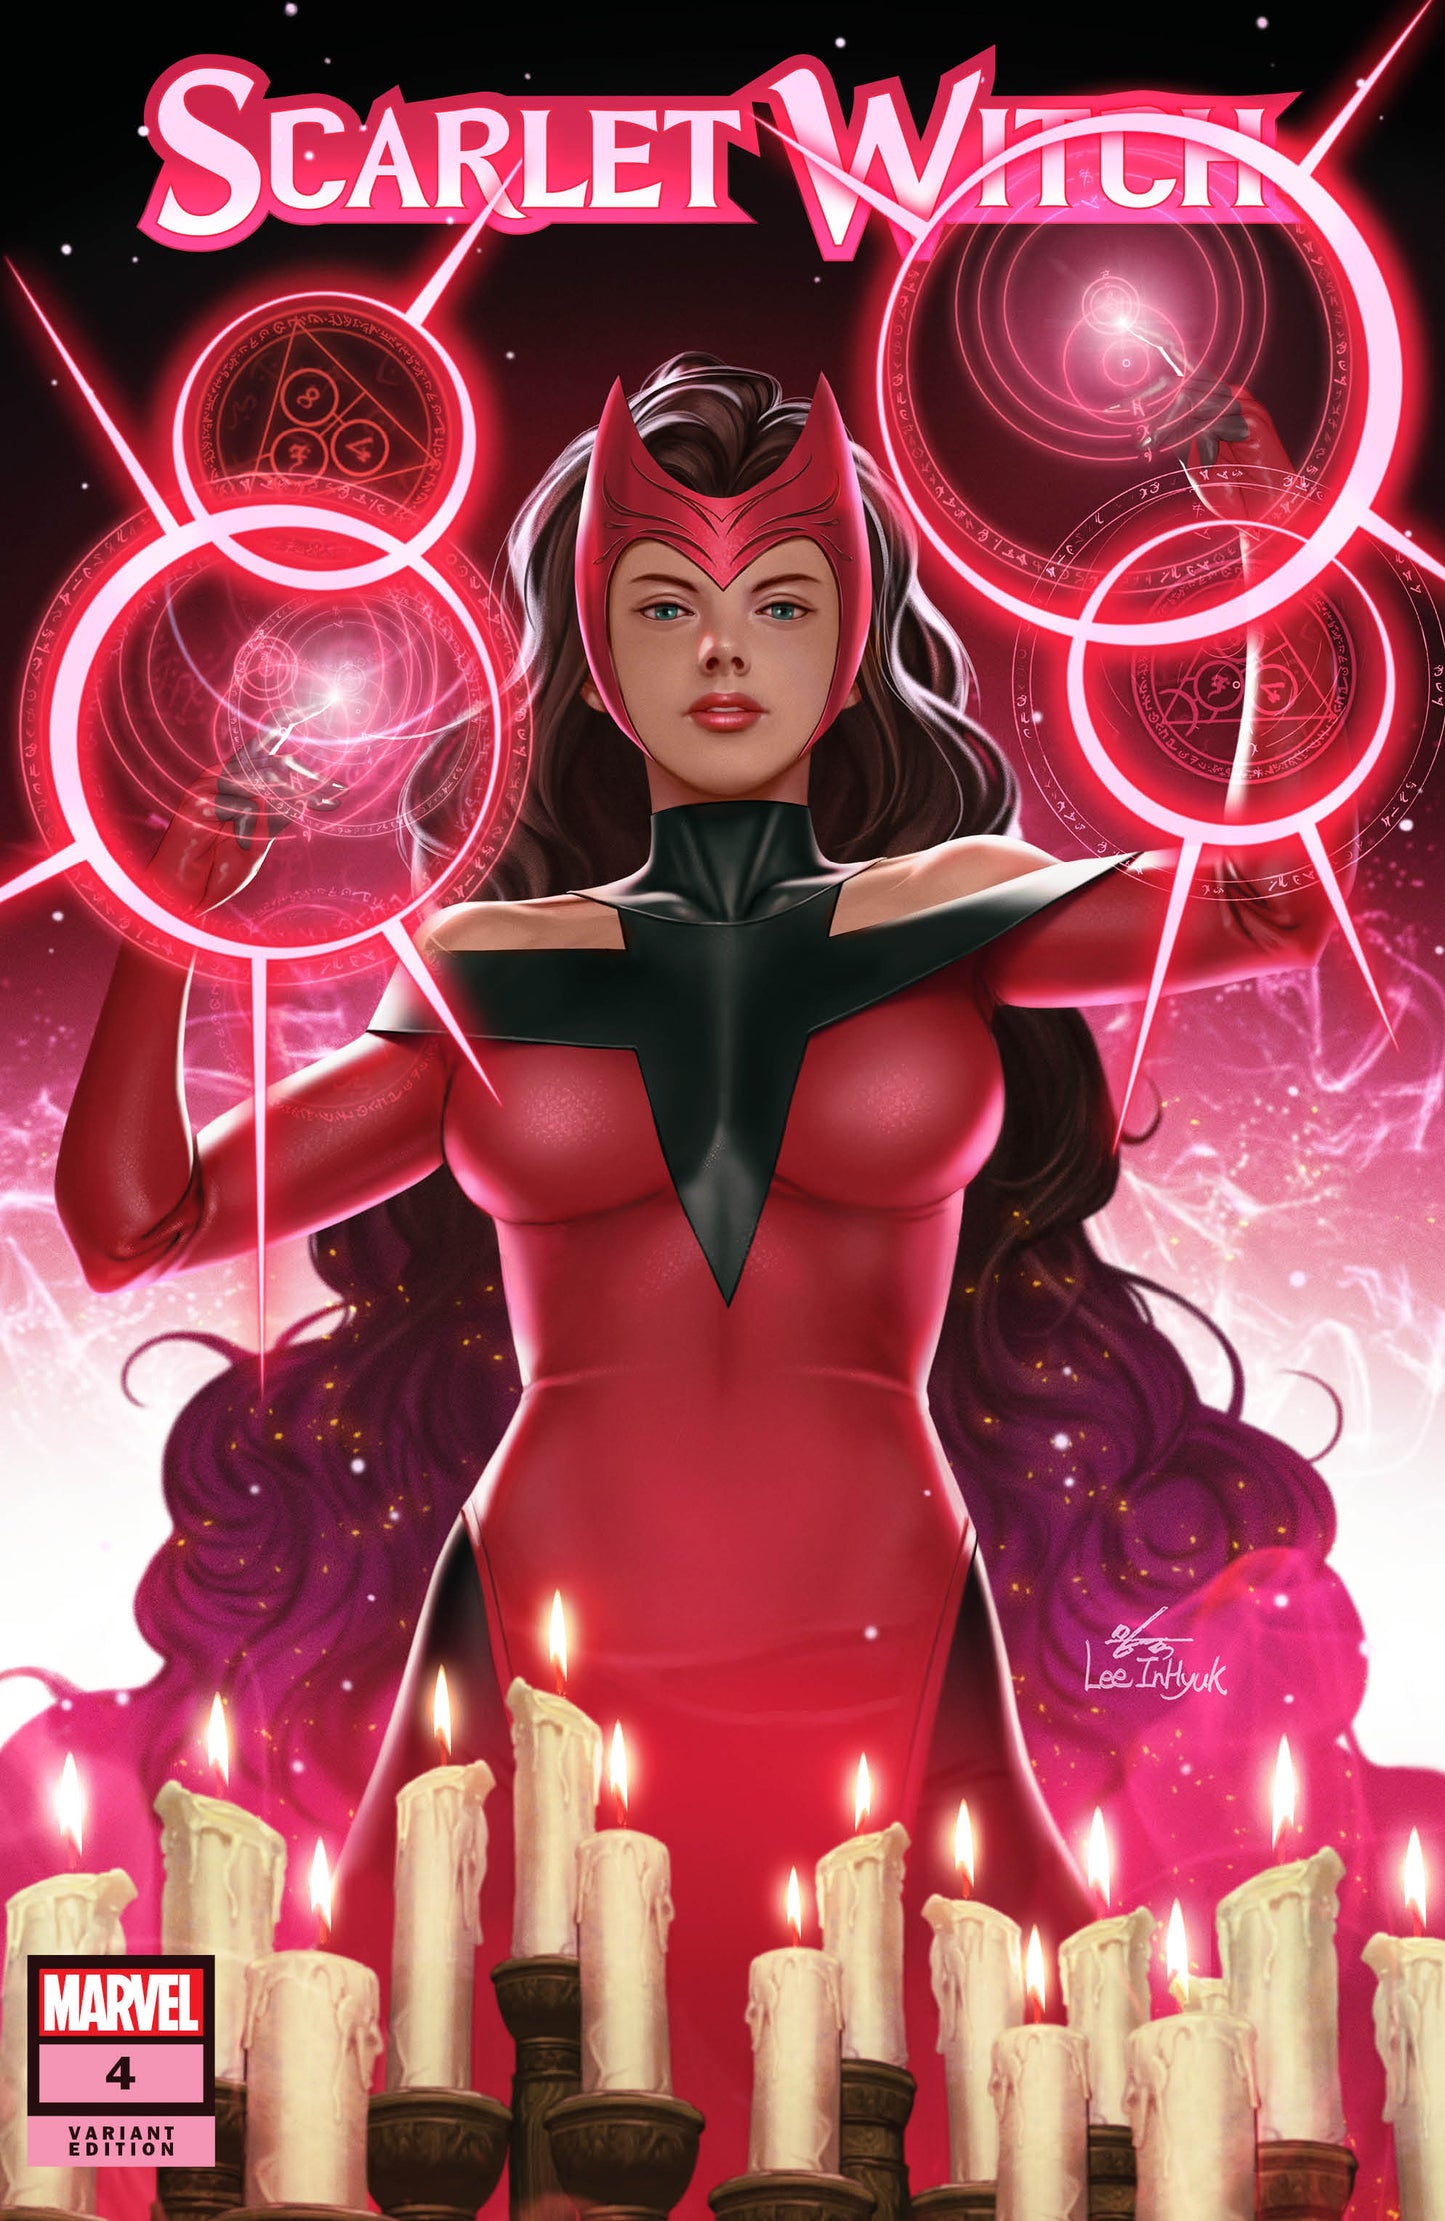 SCARLET WITCH #4 INHYUK LEE VARIANT LIMITED TO 800 COPIES WITH NUMBERED COA